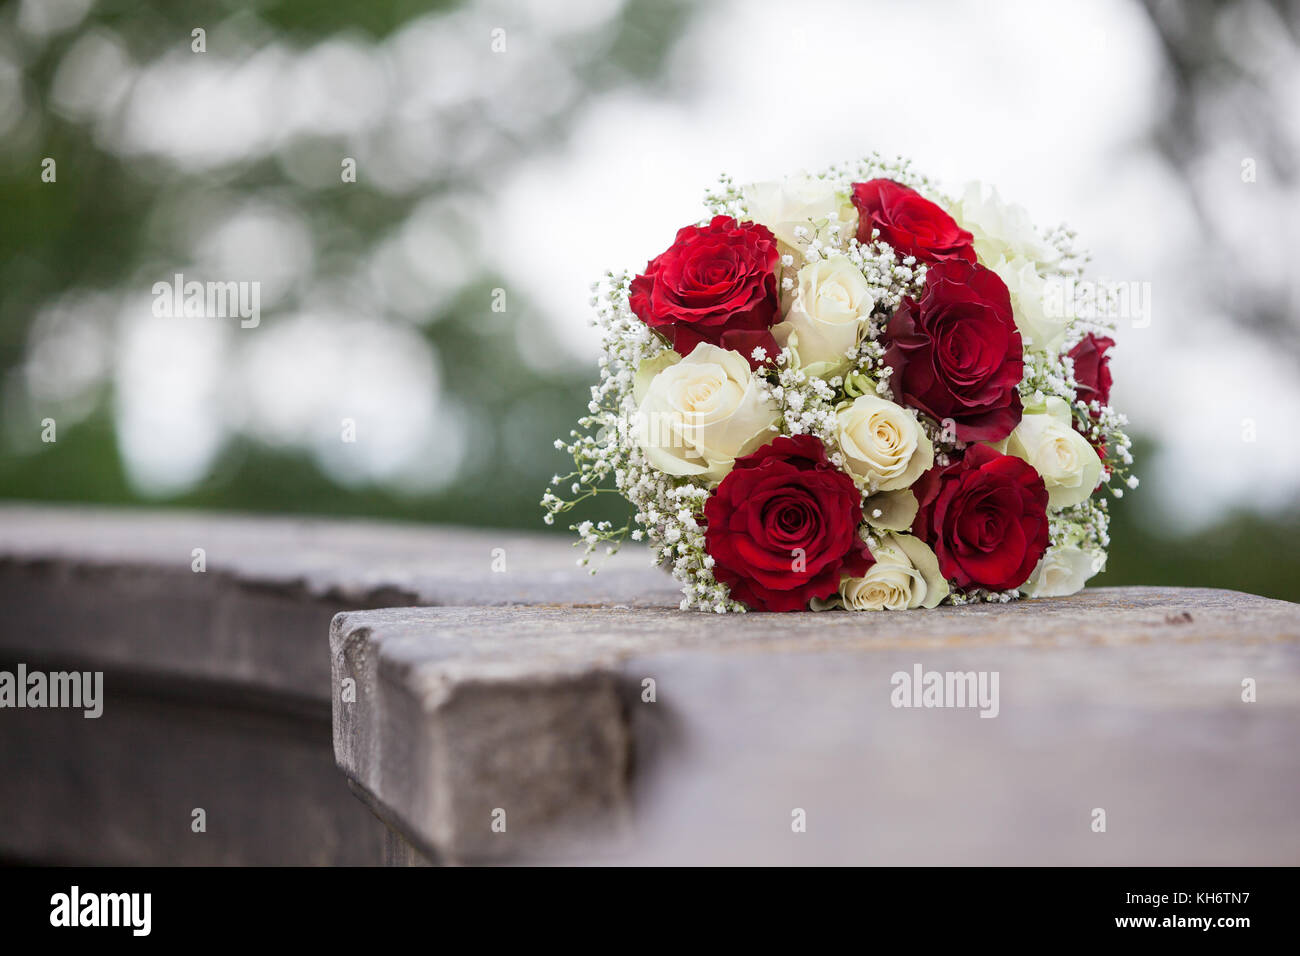 Rote Rosen High Resolution Stock Photography and Images - Alamy